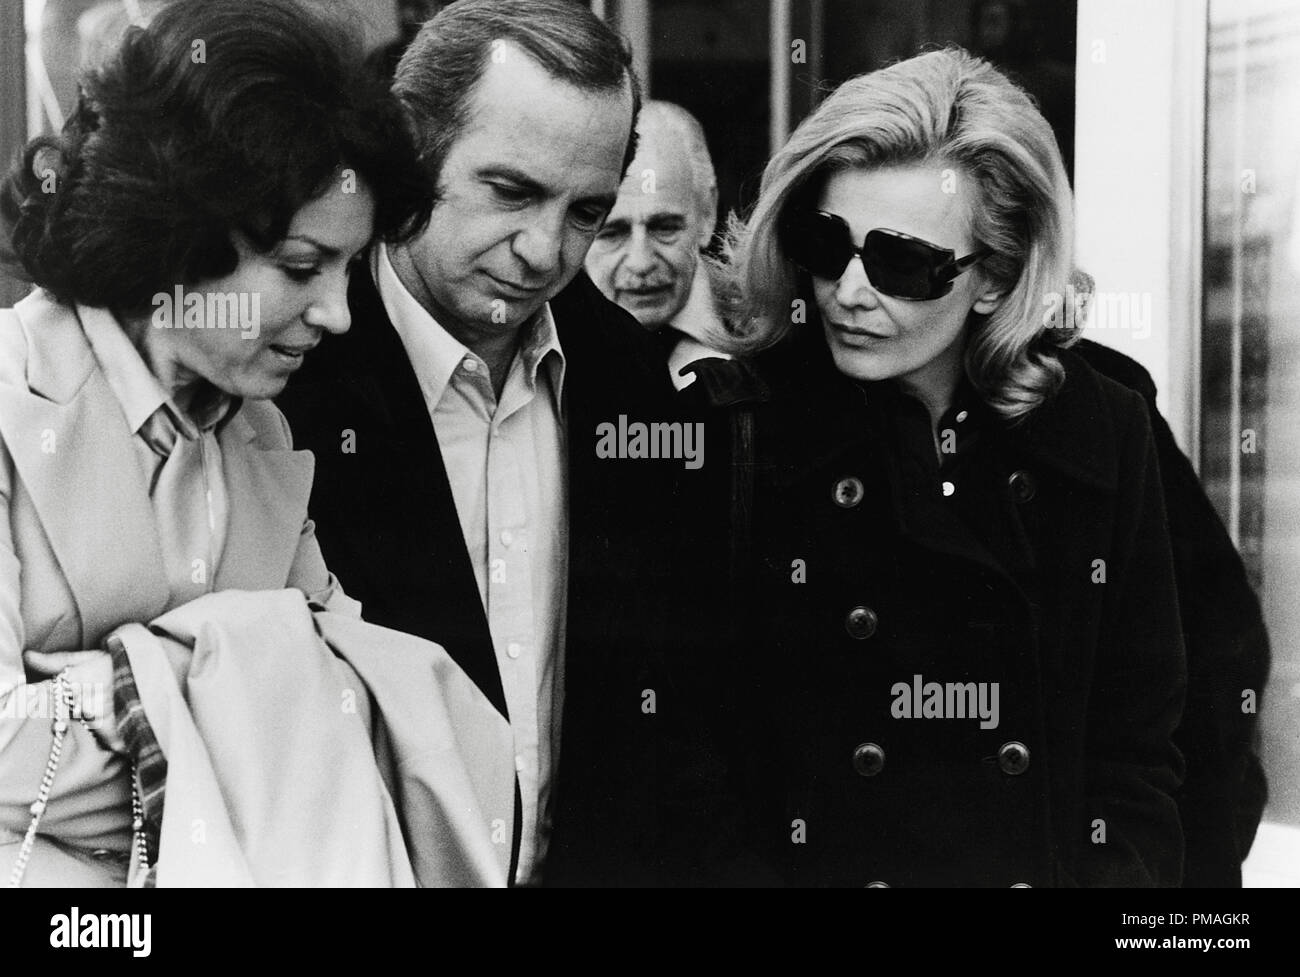 Zohra Lampert, Ben Gazzara and Gena Rowlands, 'Opening Night' 1978 Faces File Reference # 32733 171THA Stock Photo